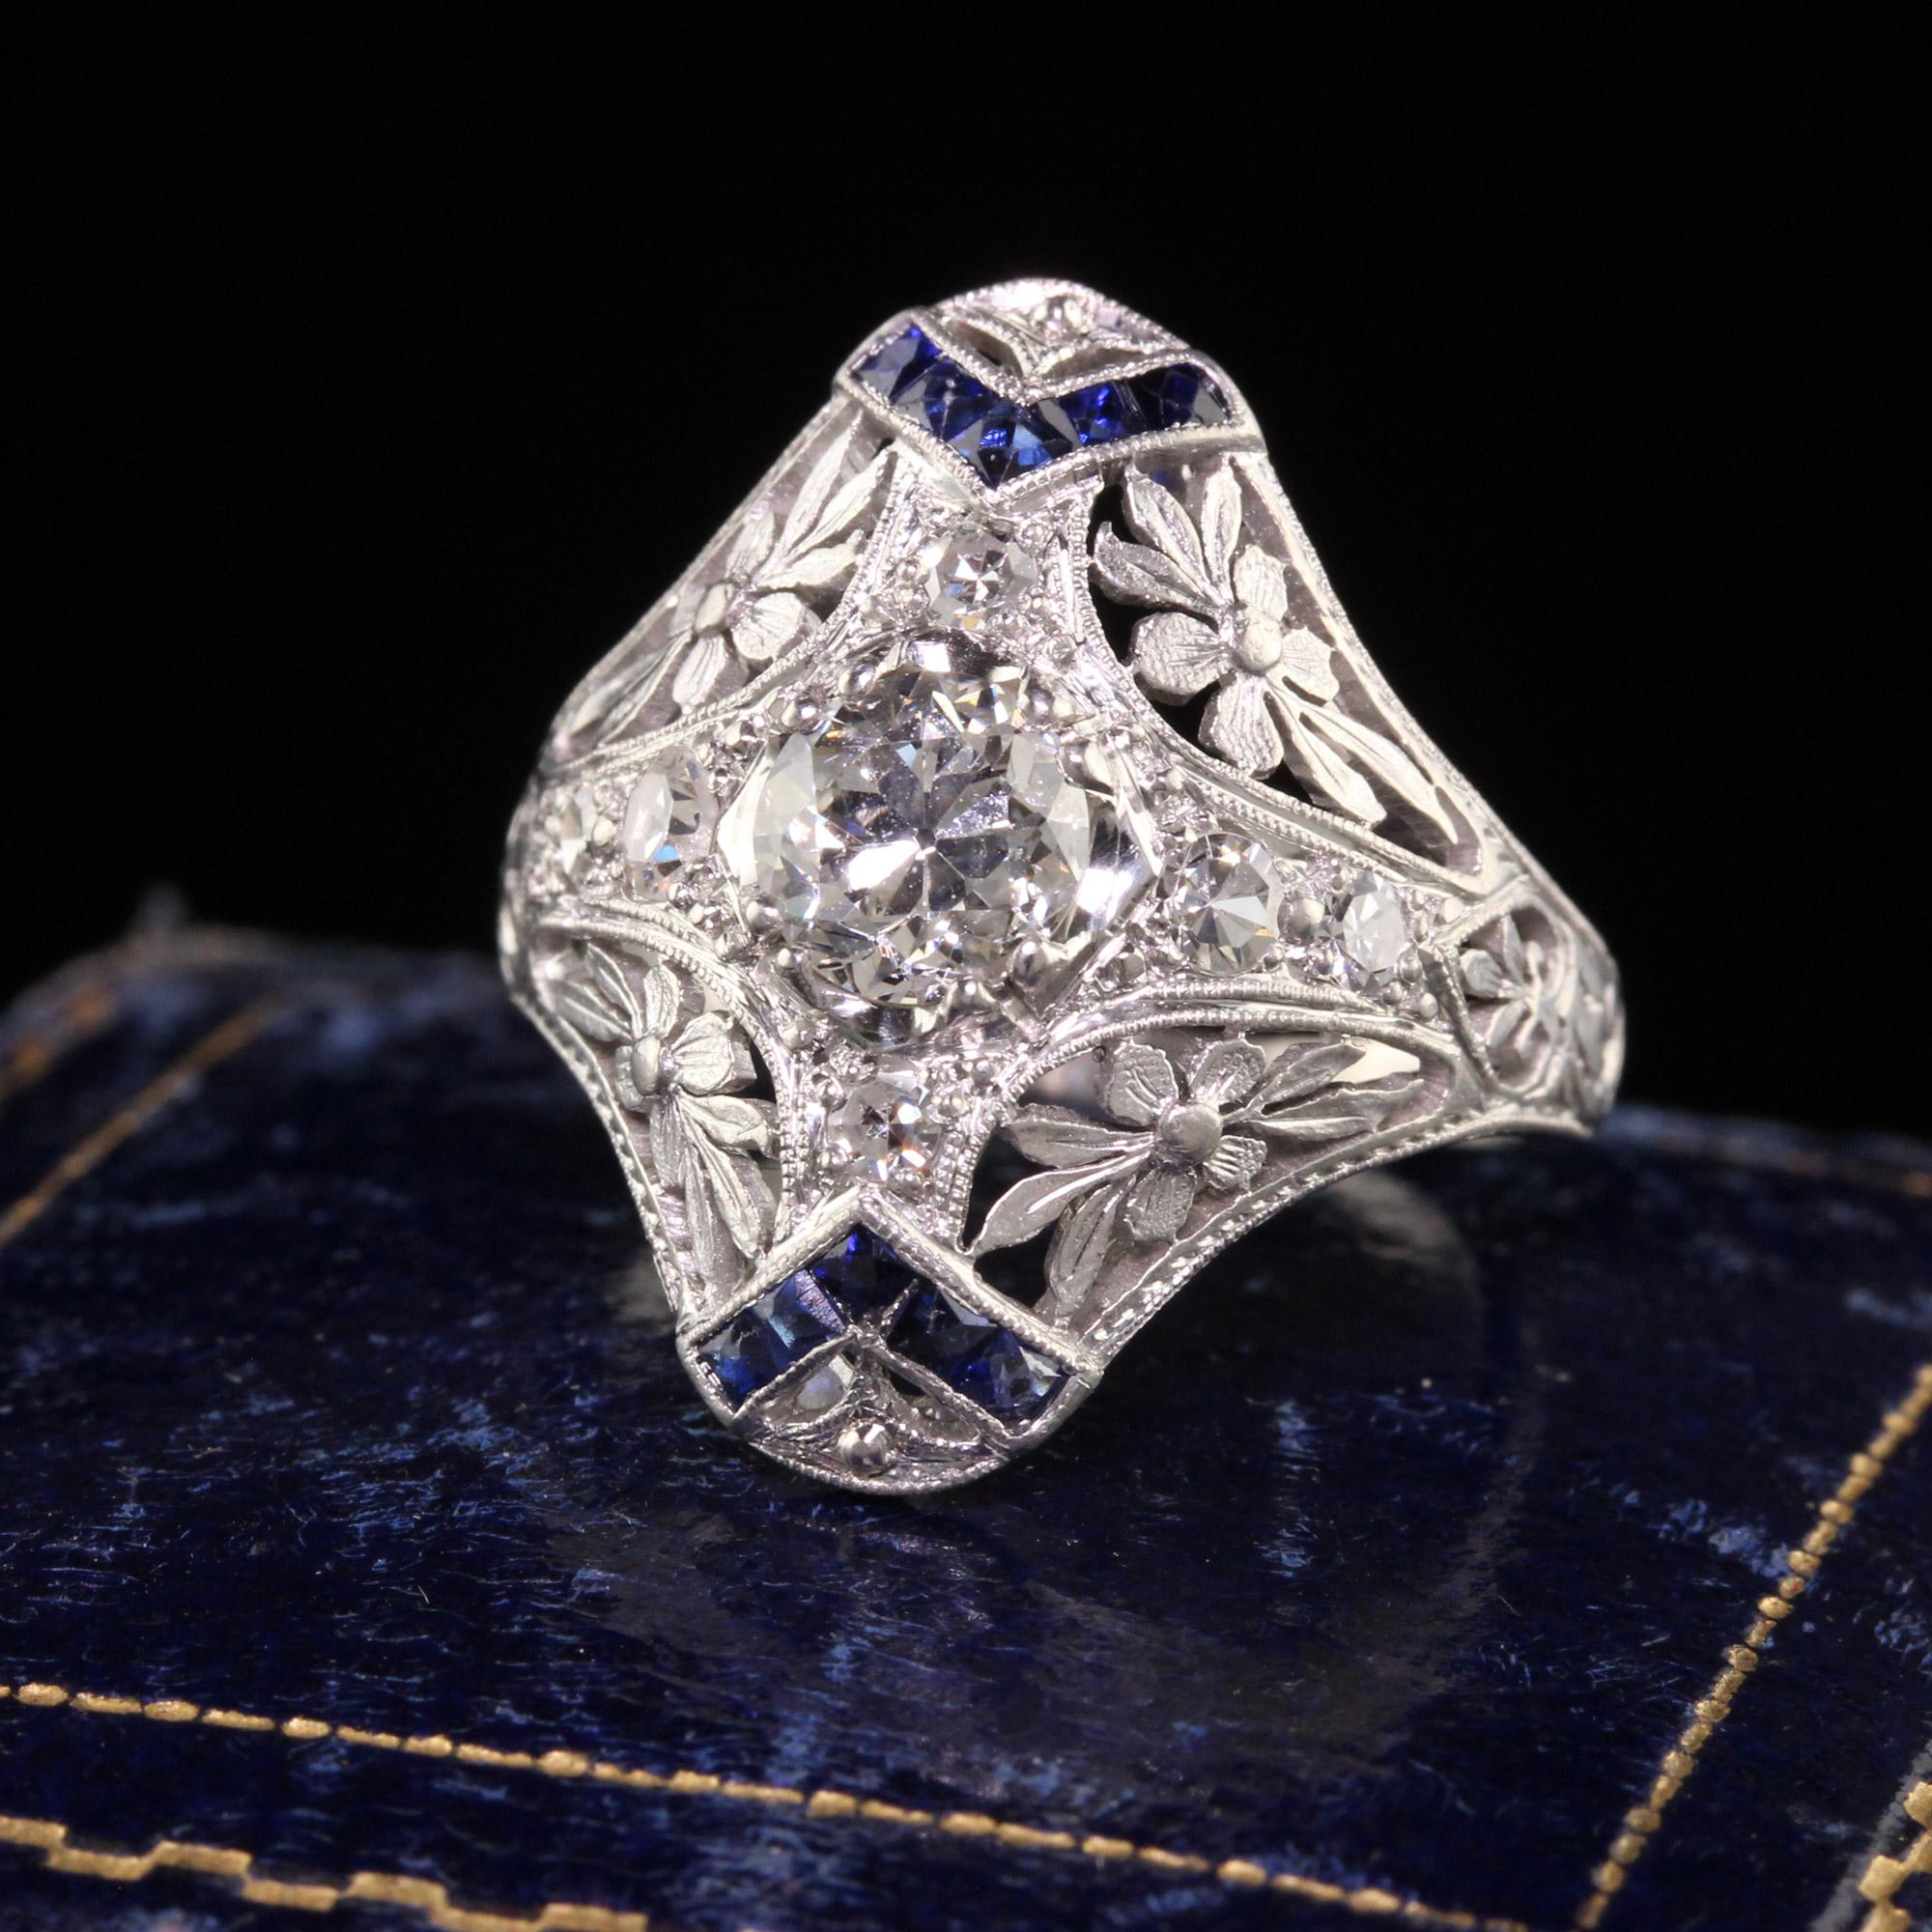 Beautiful Antique Edwardian Platinum Old European Diamond Sapphire Shield Ring. This incredible ring is crafted in platinum. The center holds an old european cut diamond that has a GIA report. Is also has gorgeous blue sapphires and single cut